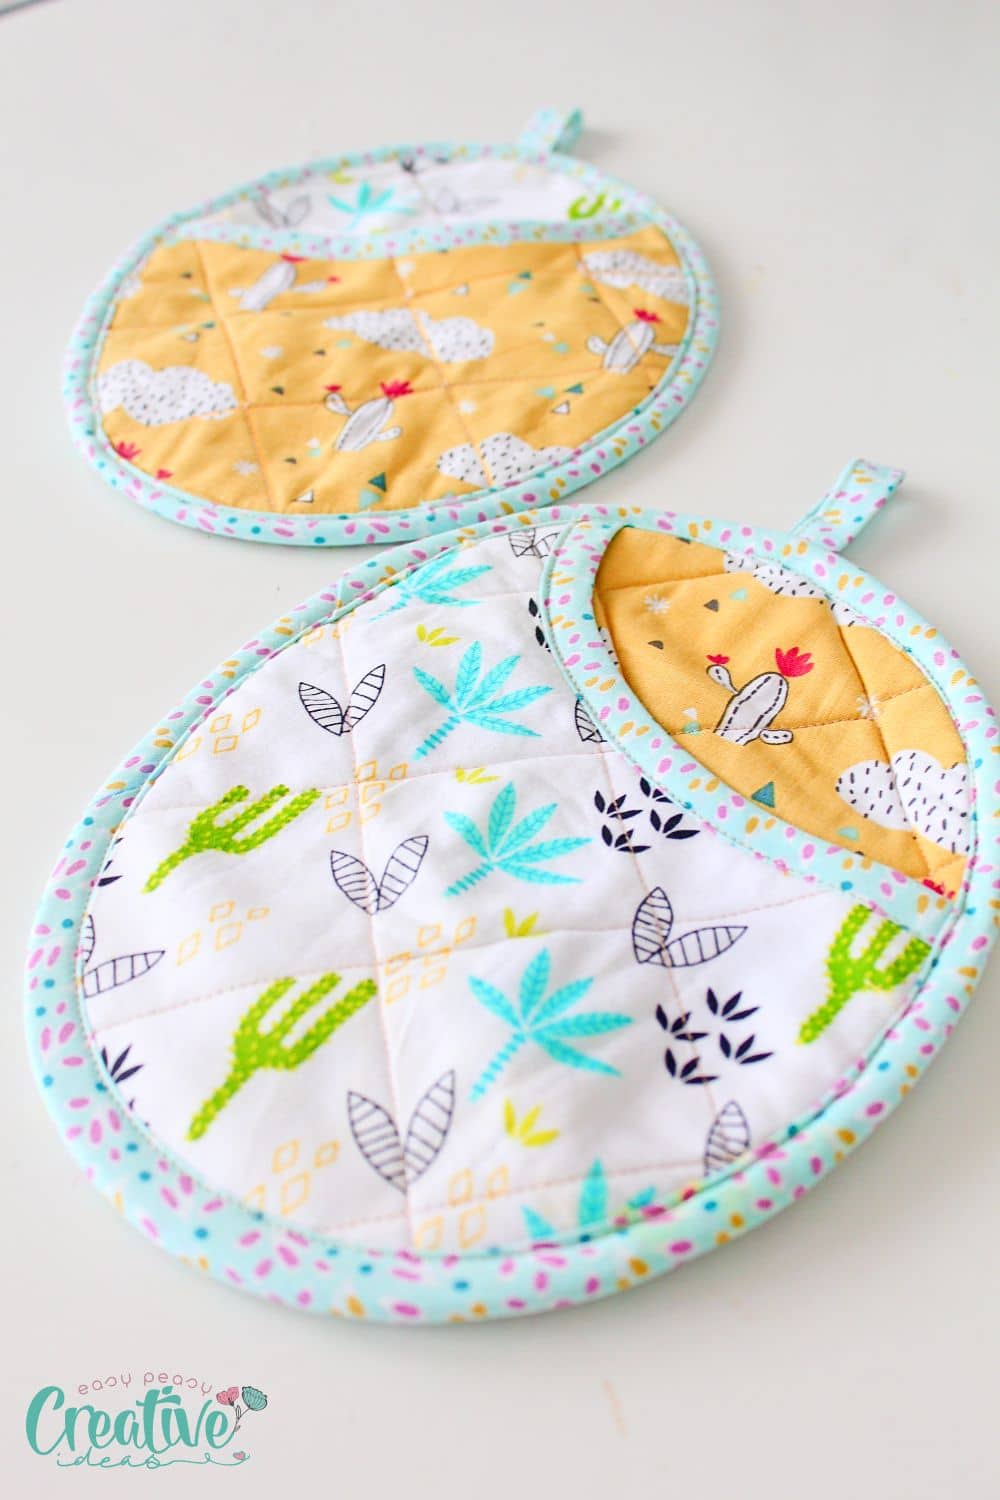 Oval shaped potholders with pockets